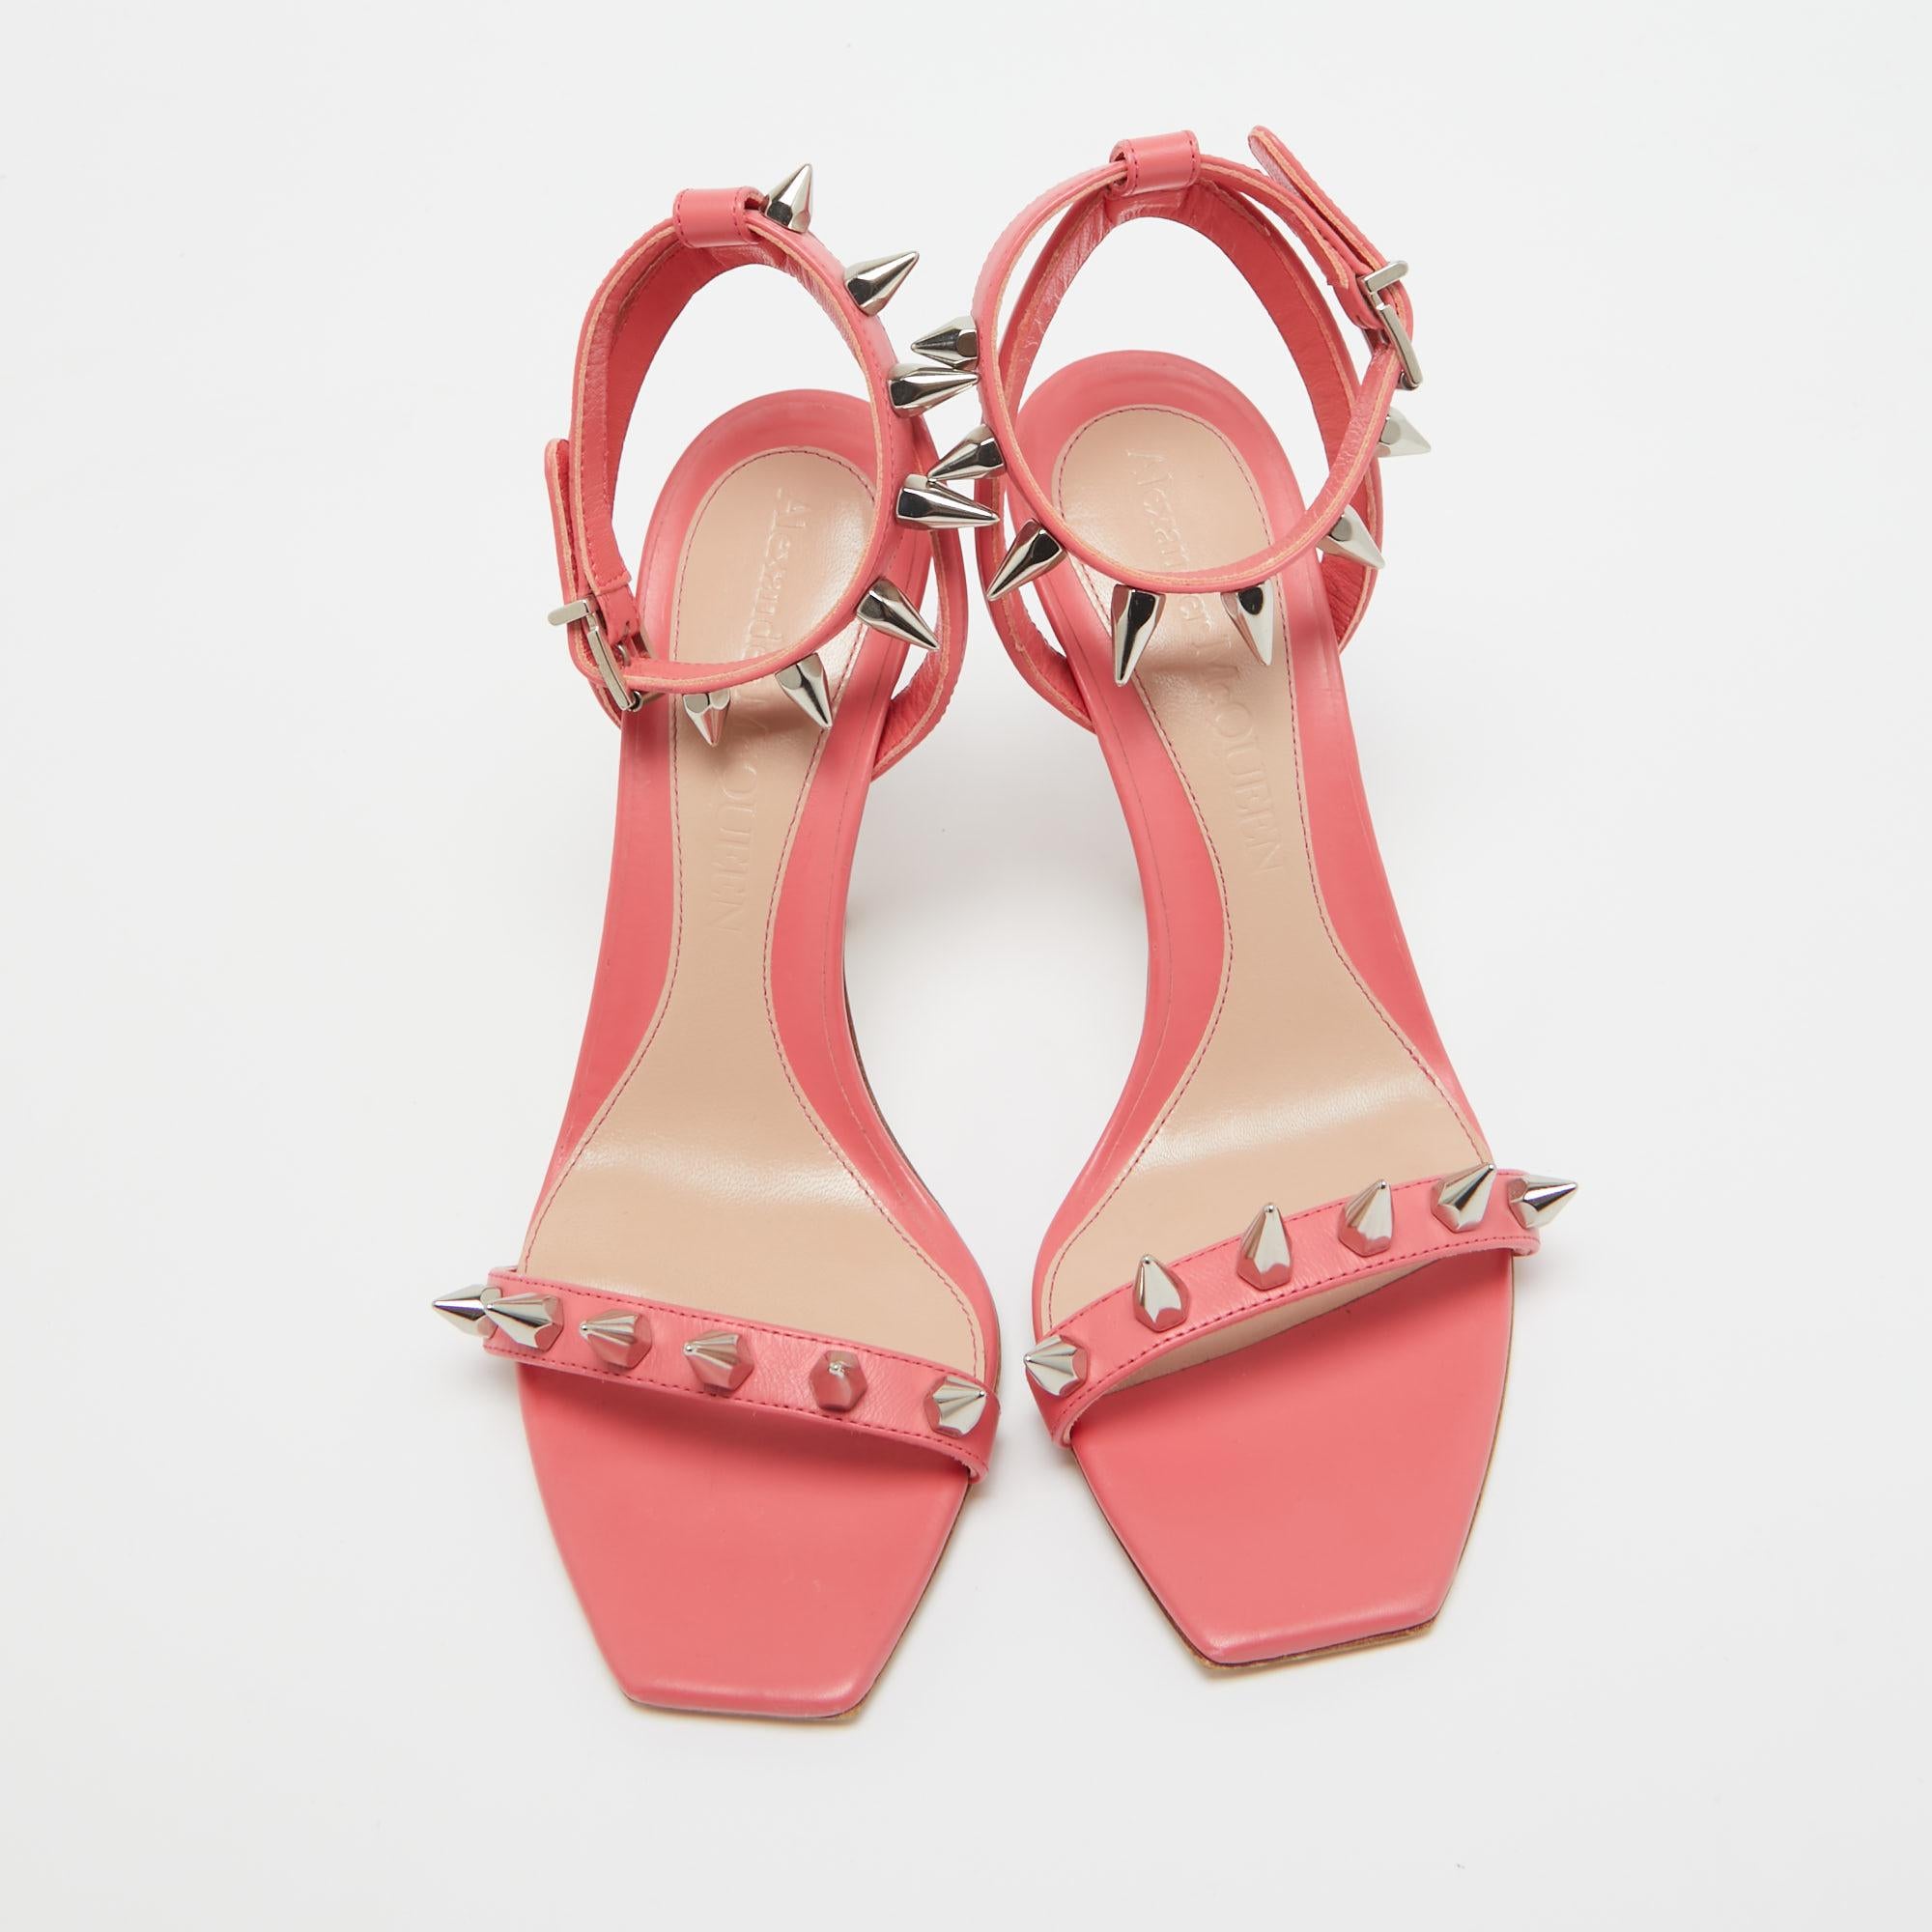 Alexander McQueen Pink Leather Spike Ankle Strap Sandals Size 36.5 For Sale 1